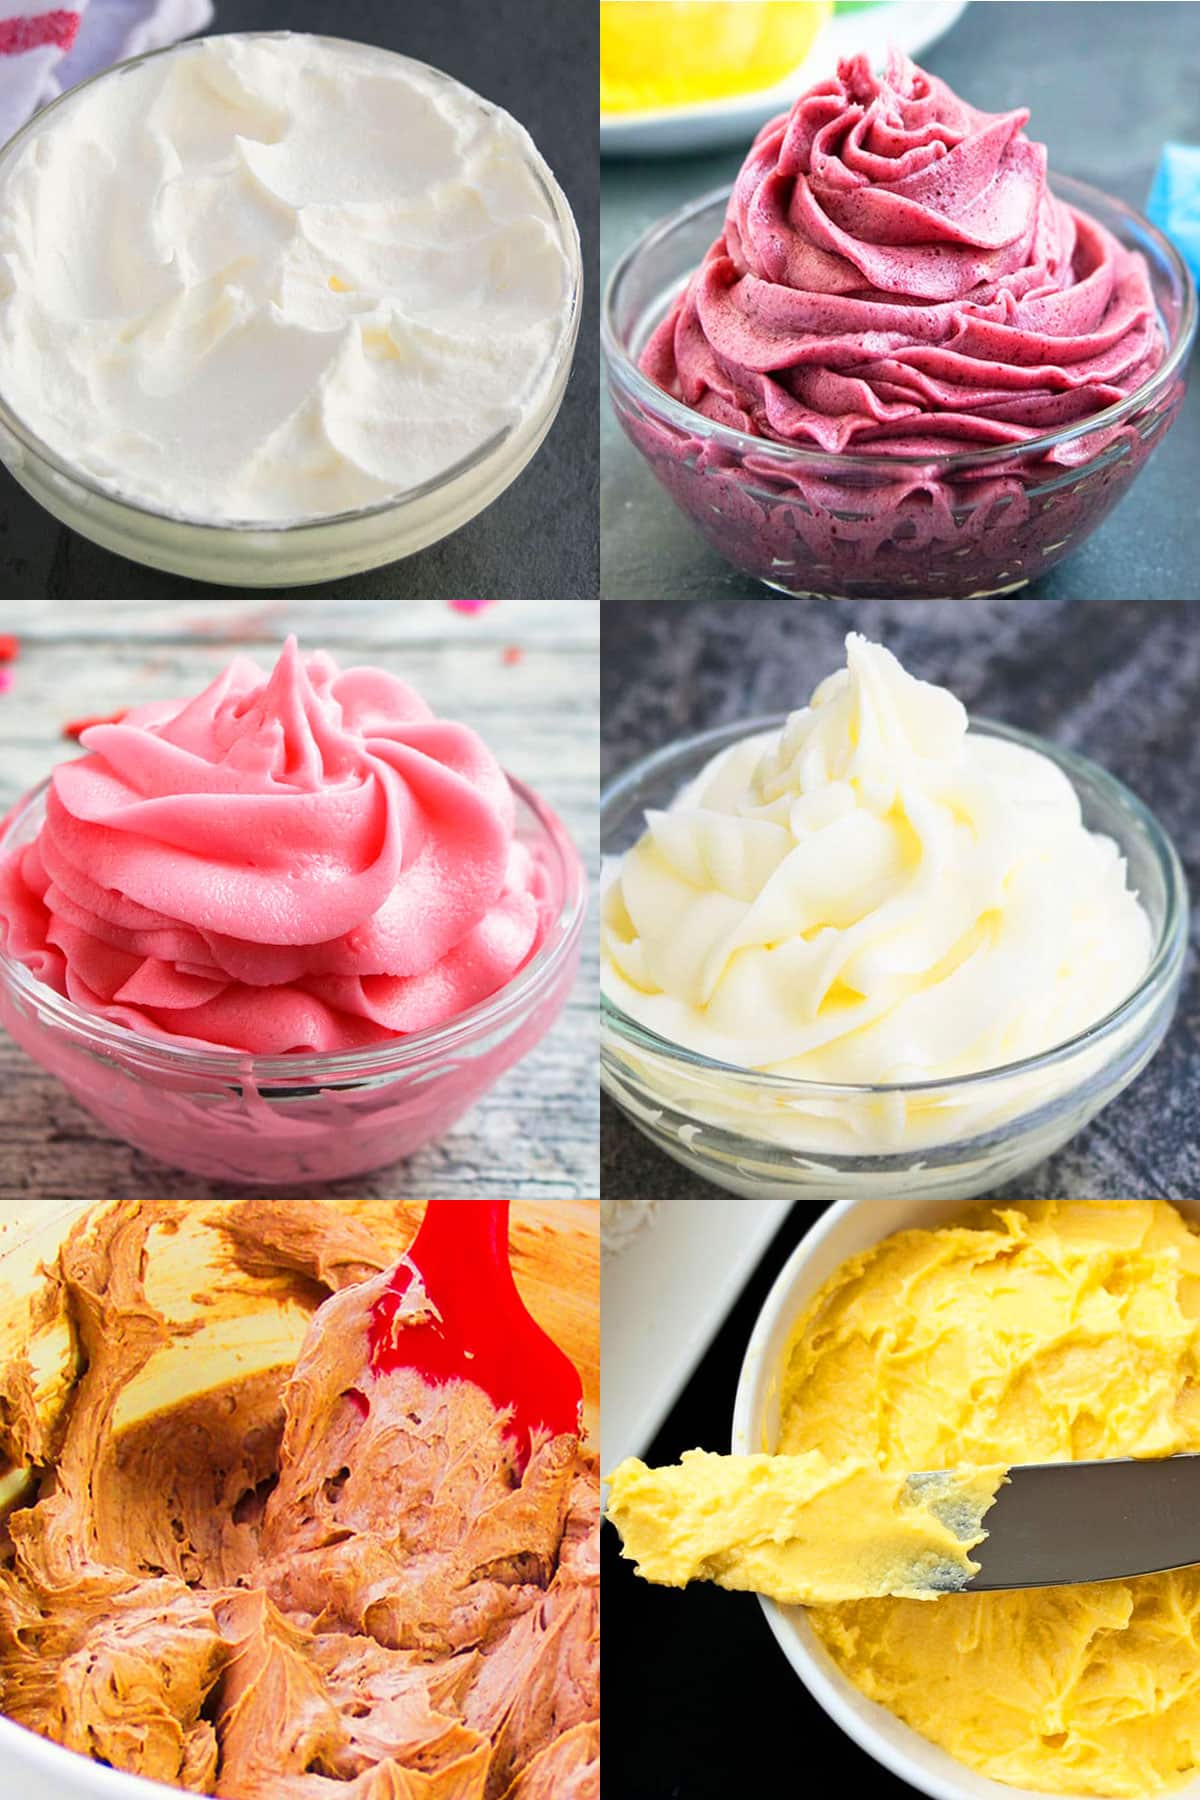 Collage Image With Many Homemade Frosting Recipes For Desserts